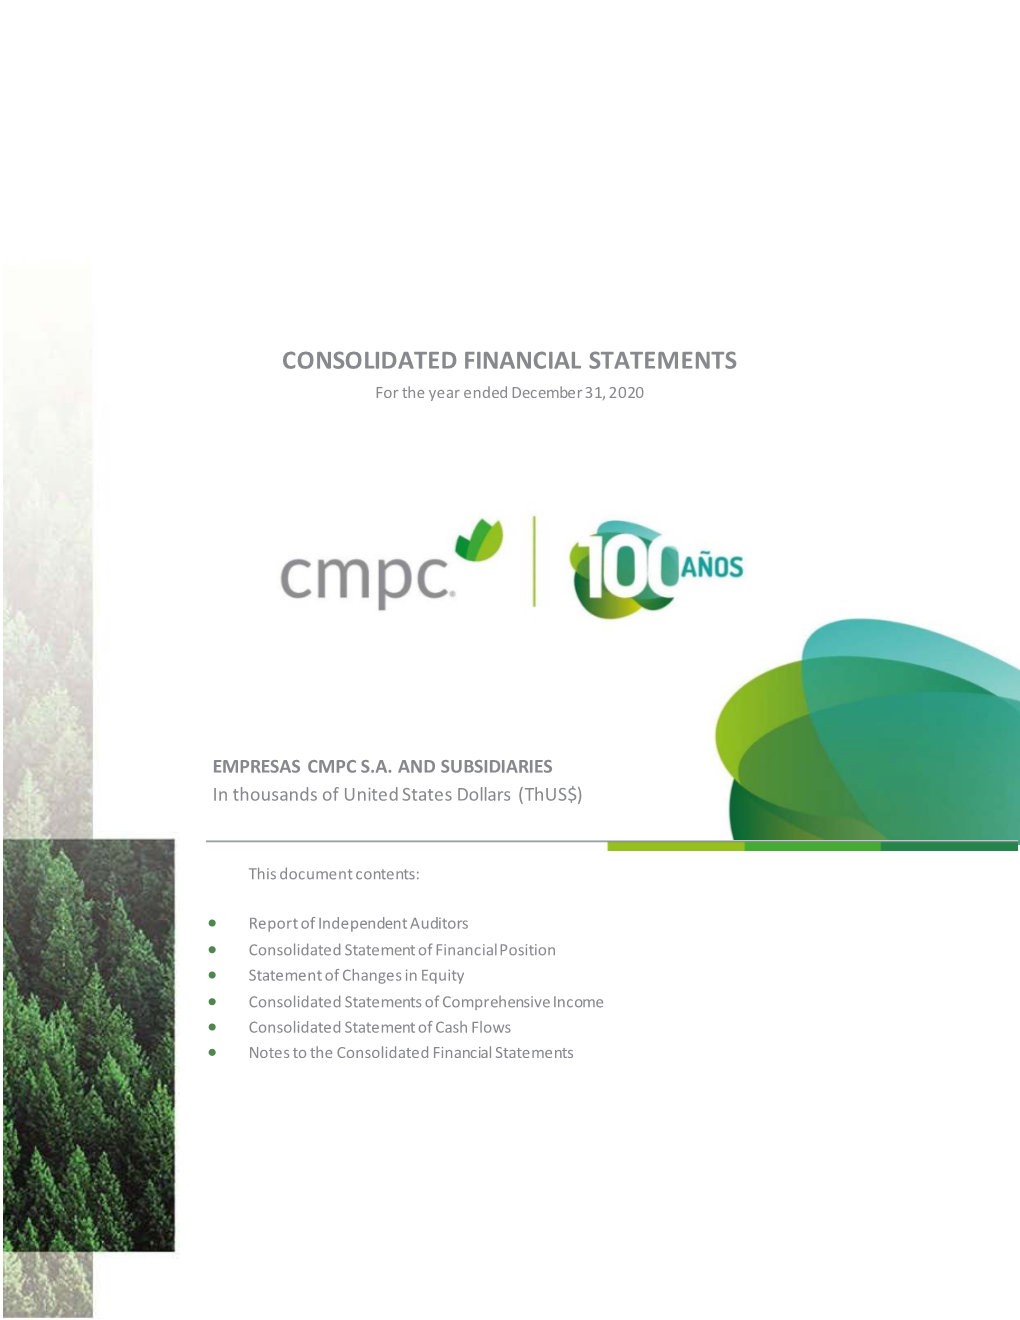 CONSOLIDATED FINANCIAL STATEMENTS for the Year Ended December 31, 2020